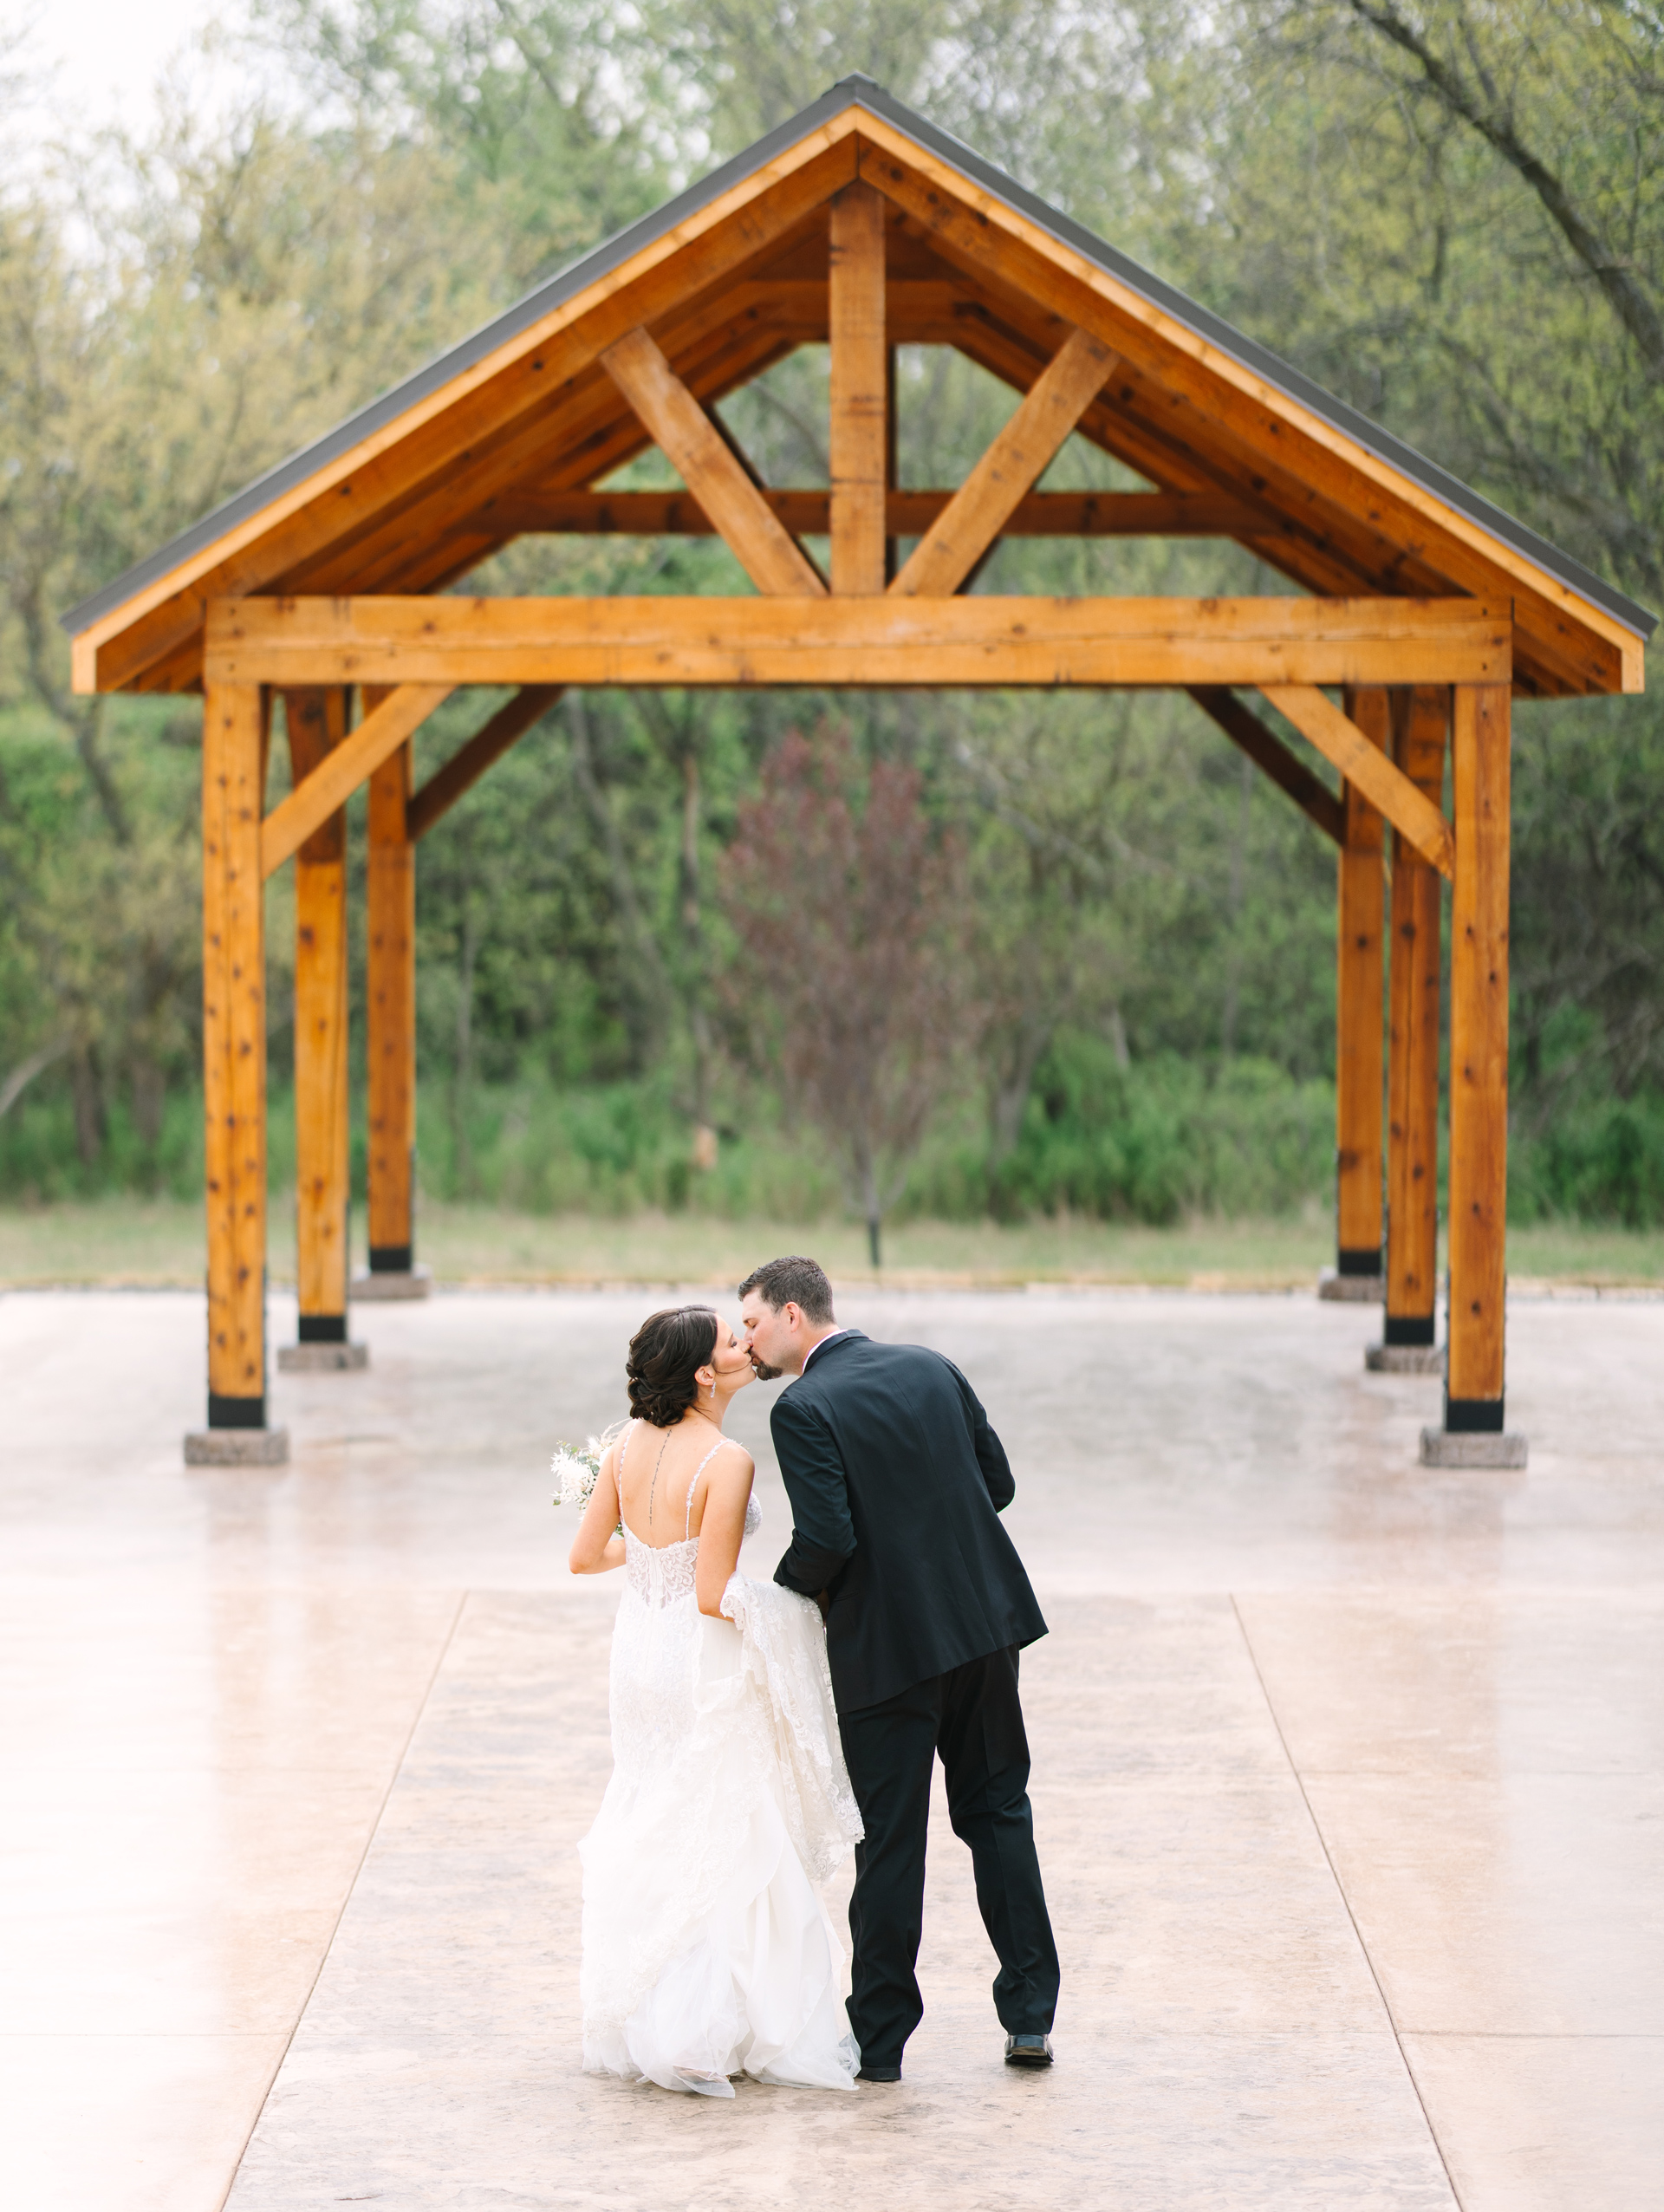 A caucasian bride and groom stop to kiss in front of a wooden pavilion surrounded by trees